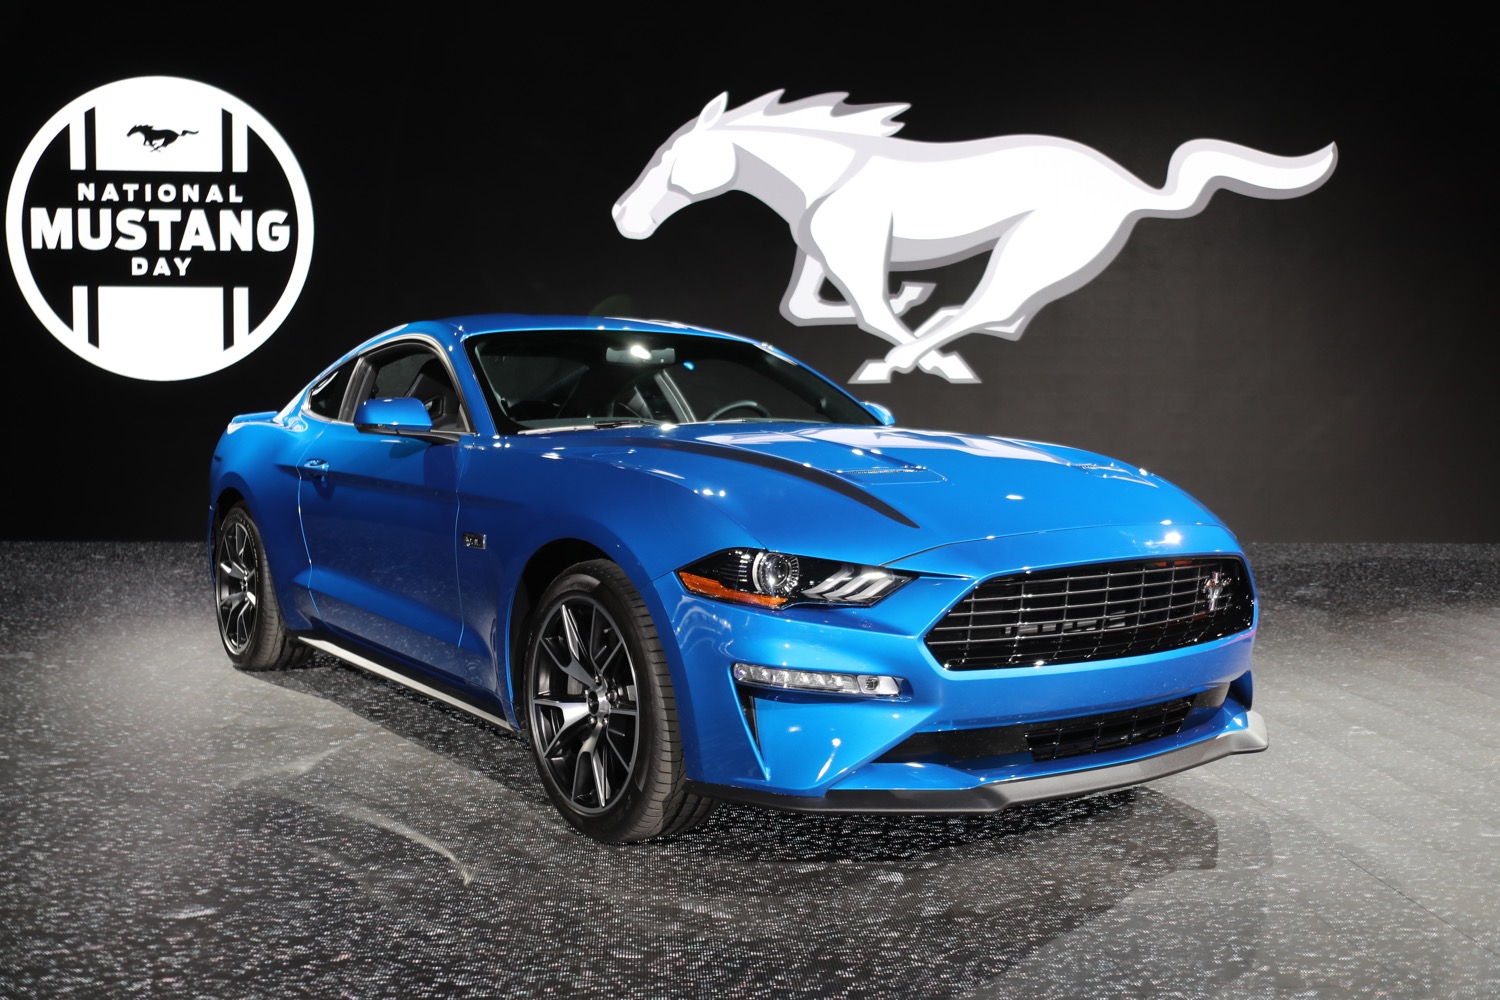 New Velocity Blue Color For The 2019 Ford Mustang